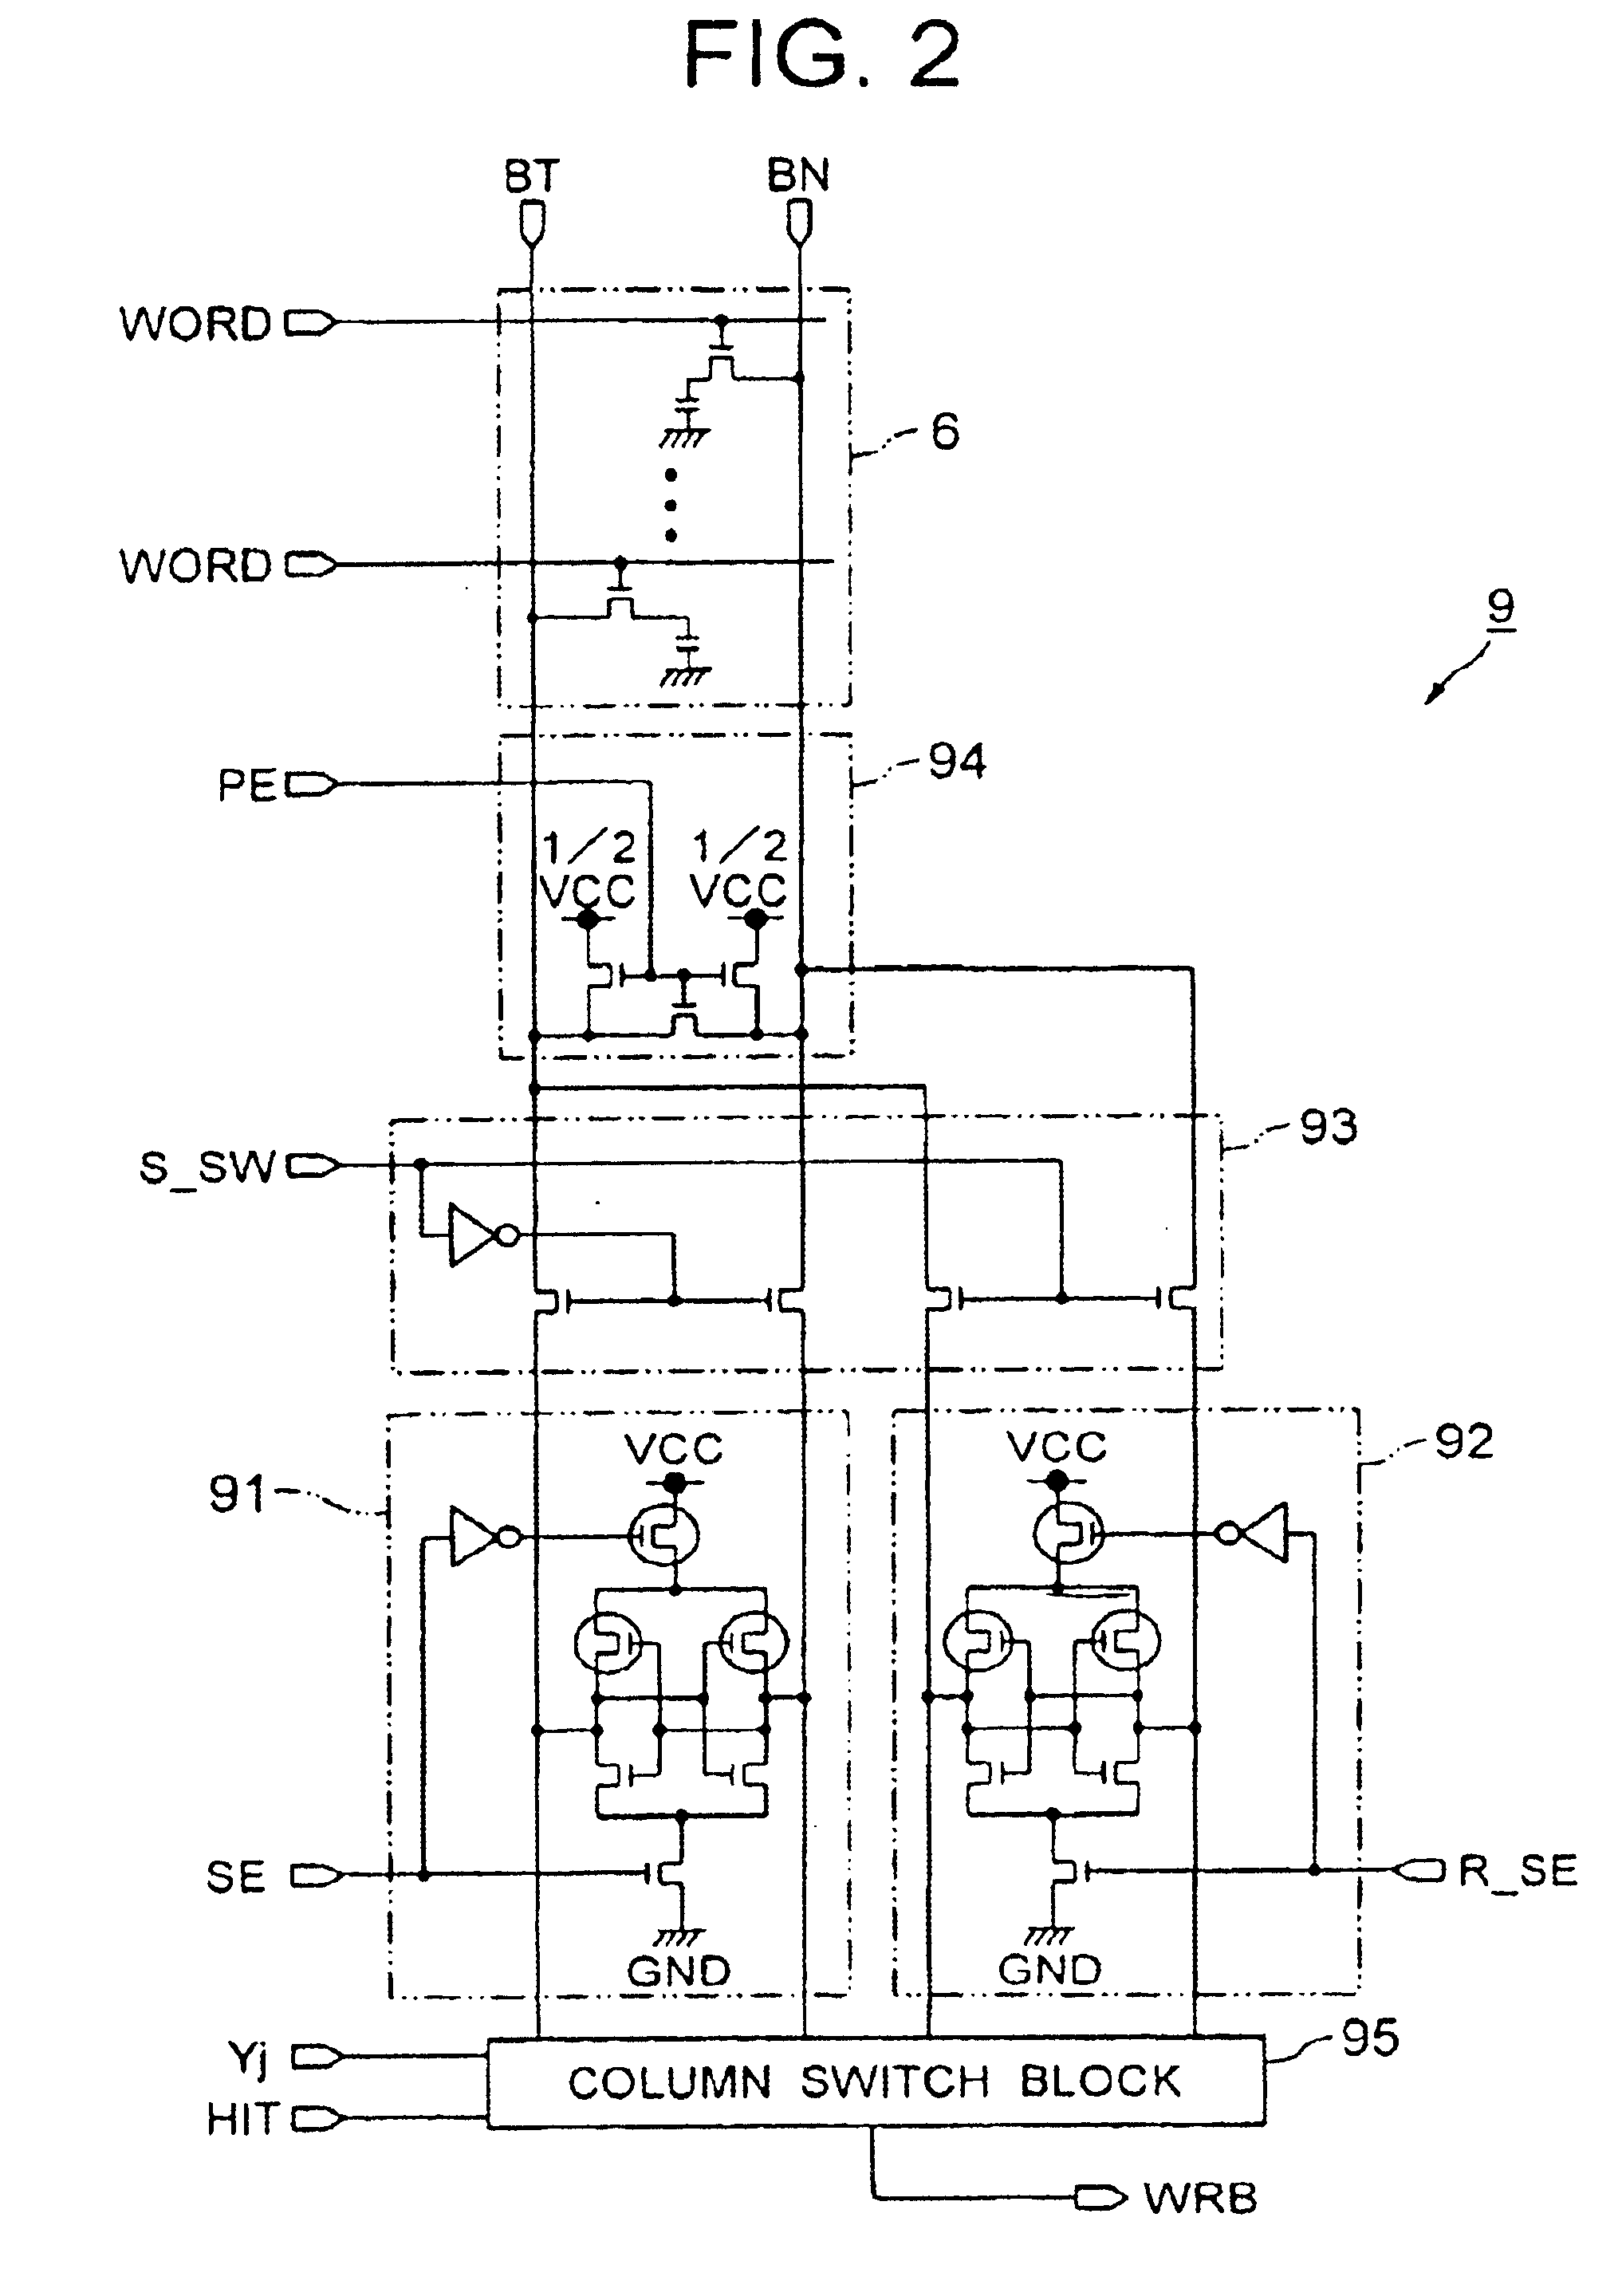 Semiconductor memory device having a DRAM cell structure and handled as a SRAM